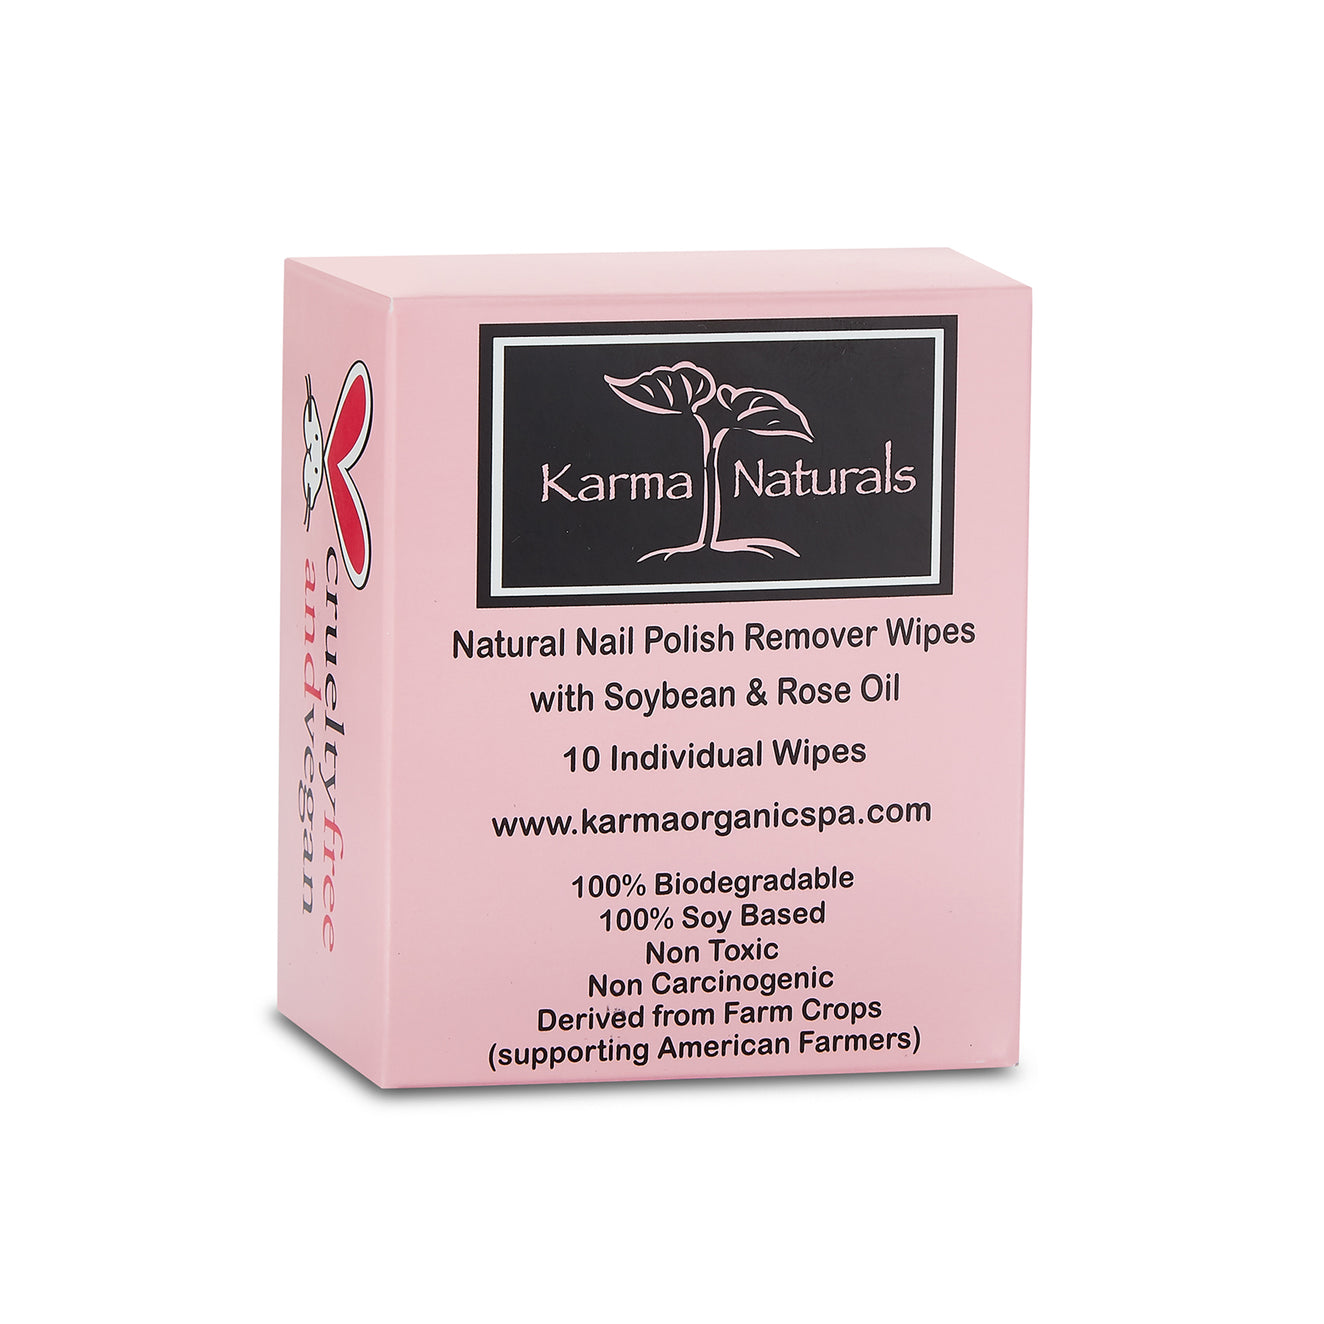 Karma Naturals  Nail Polish Remover Wipes with Rose Oil  - 1 Pack of 10 Individually Wrapped Wipes